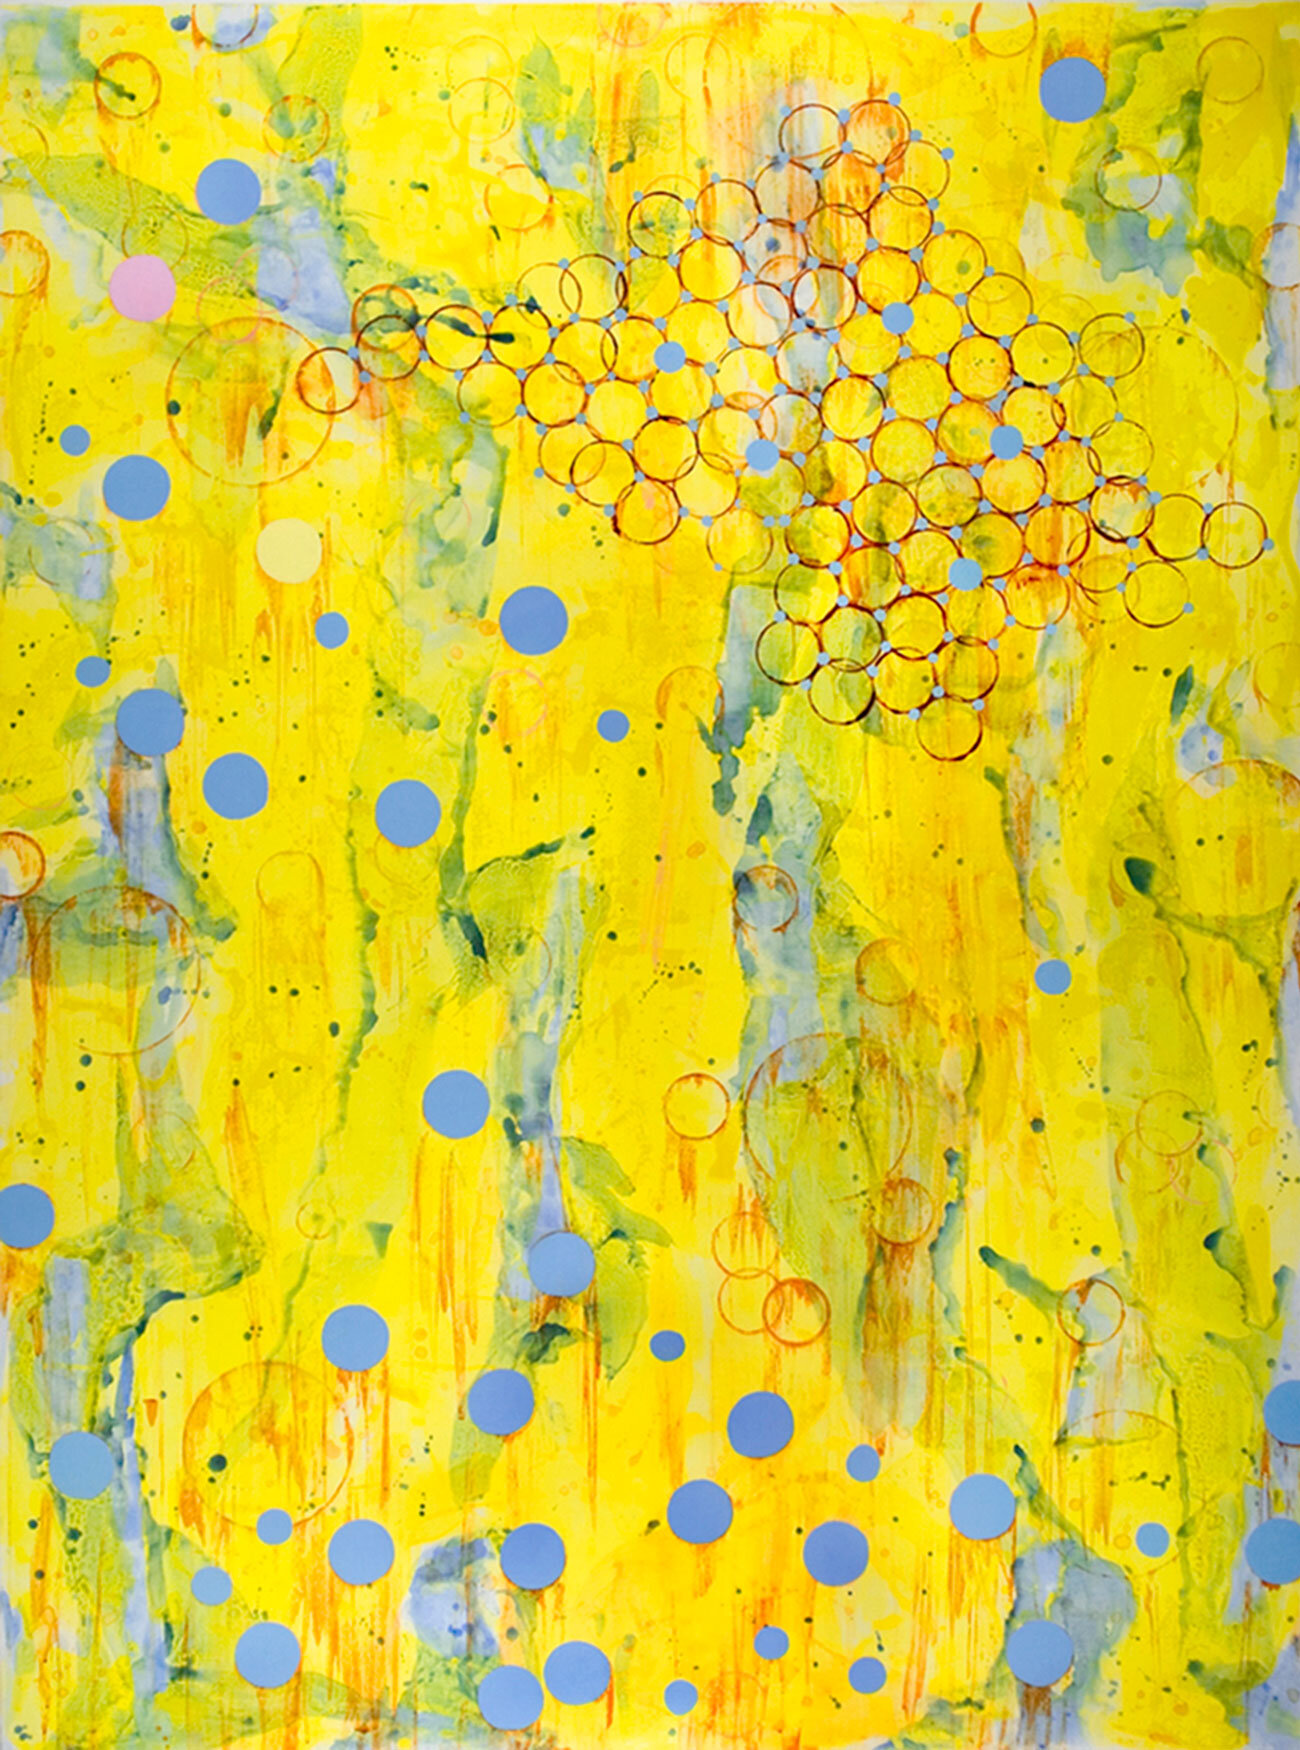   Looking Through the Yellow Sea of Blue Moons , 2004, acrylic on canvas, 80 x 60 inches  